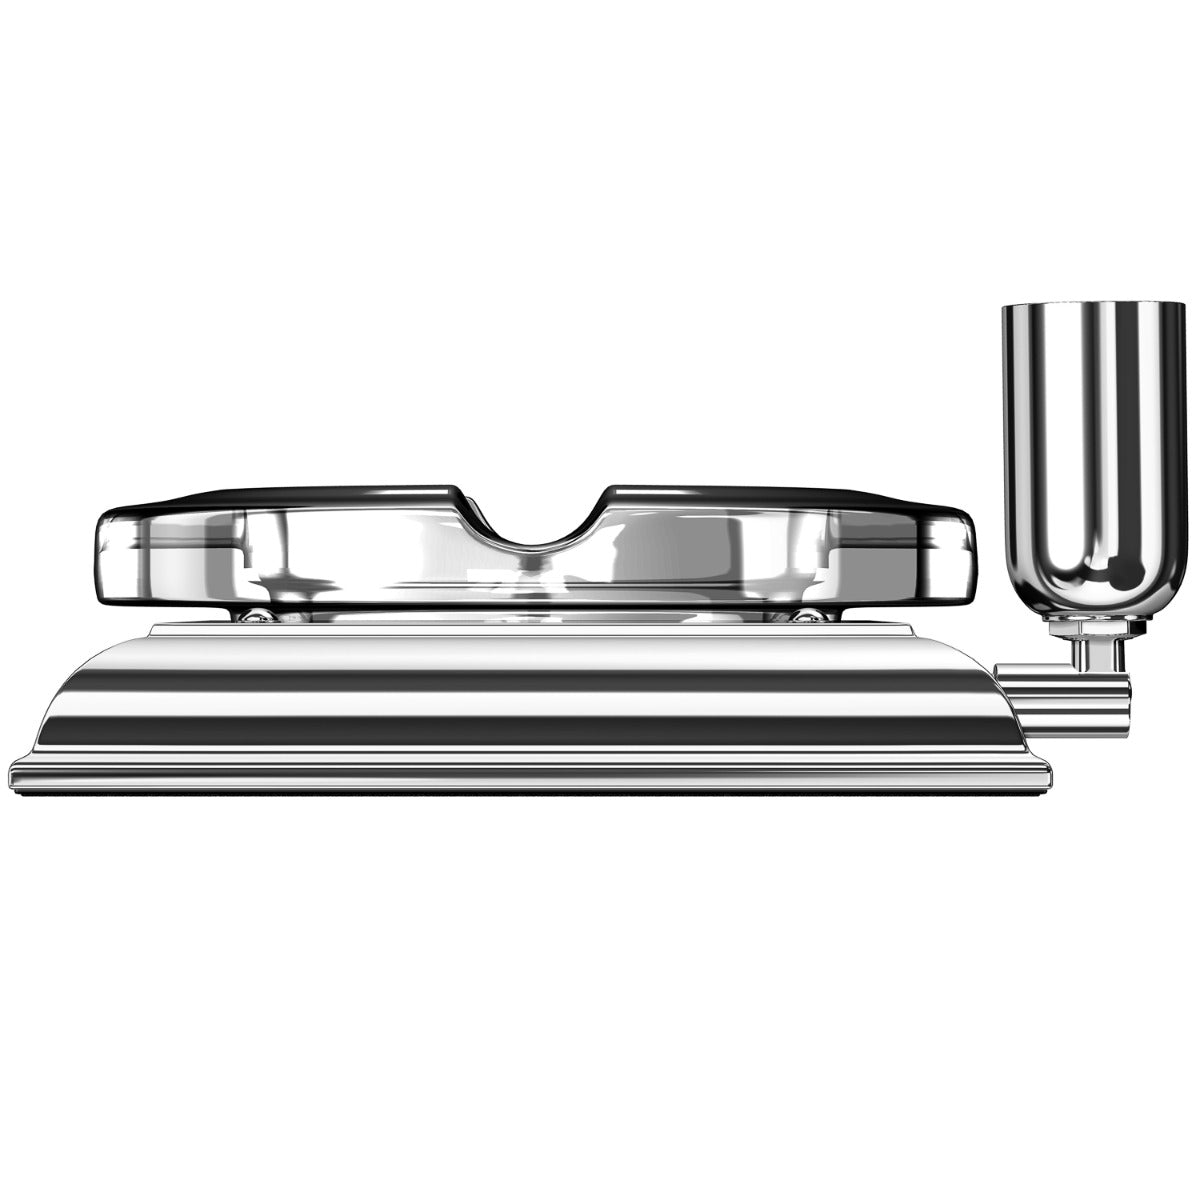 A black and white drawing of an El Casco Executive Cigar Ash Tray (Chrome) cigarette holder.